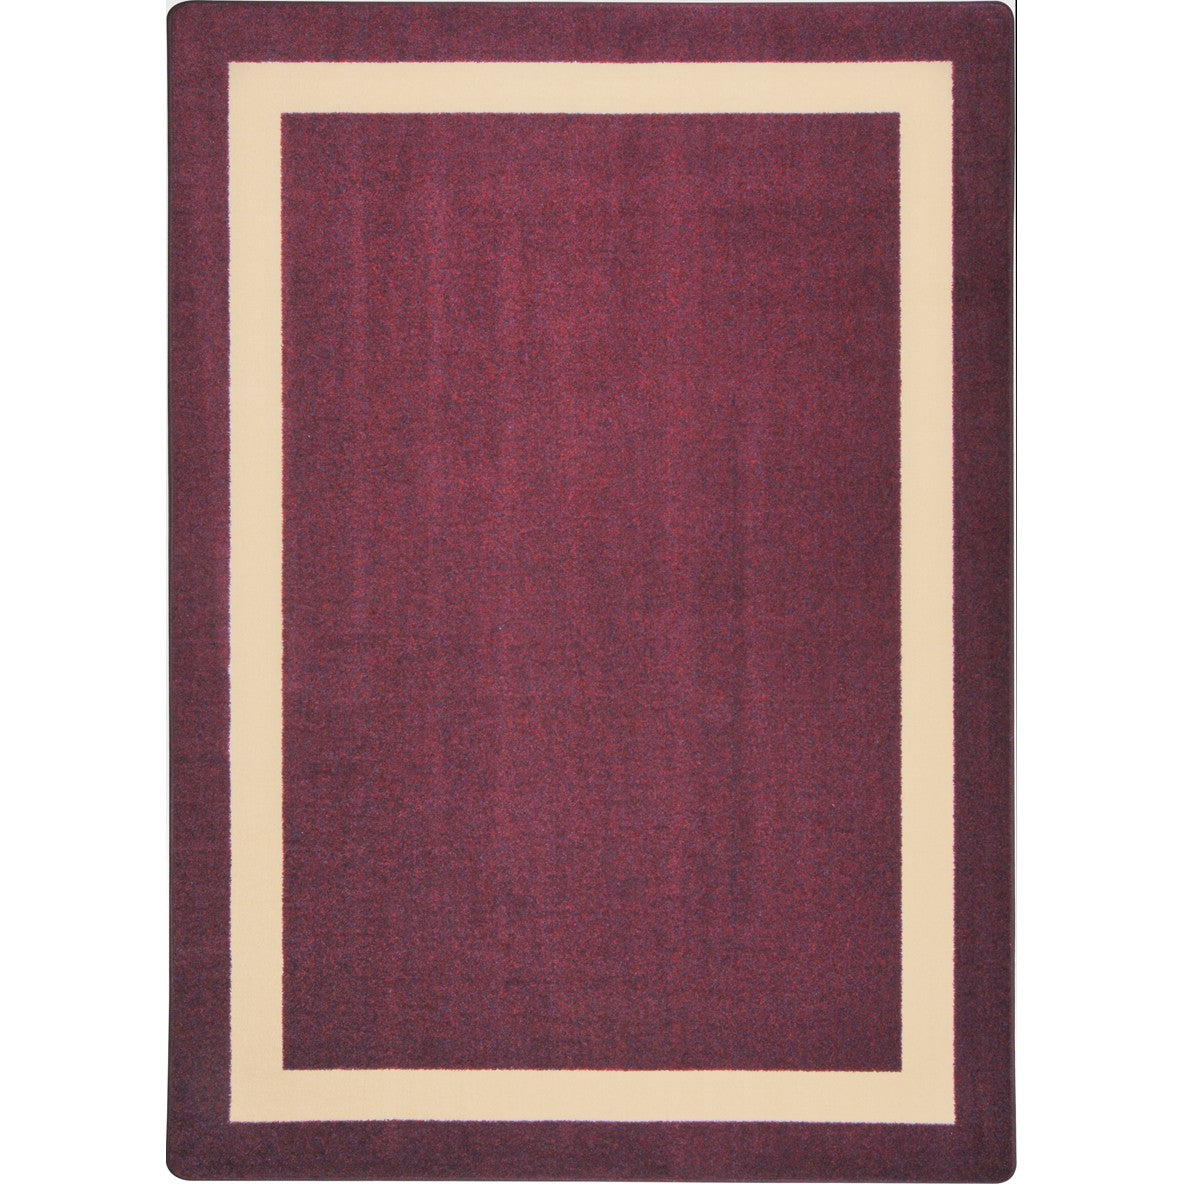 Portrait Kid Essentials Collection Area Rug for Classrooms and Schools Libraries by Joy Carpets